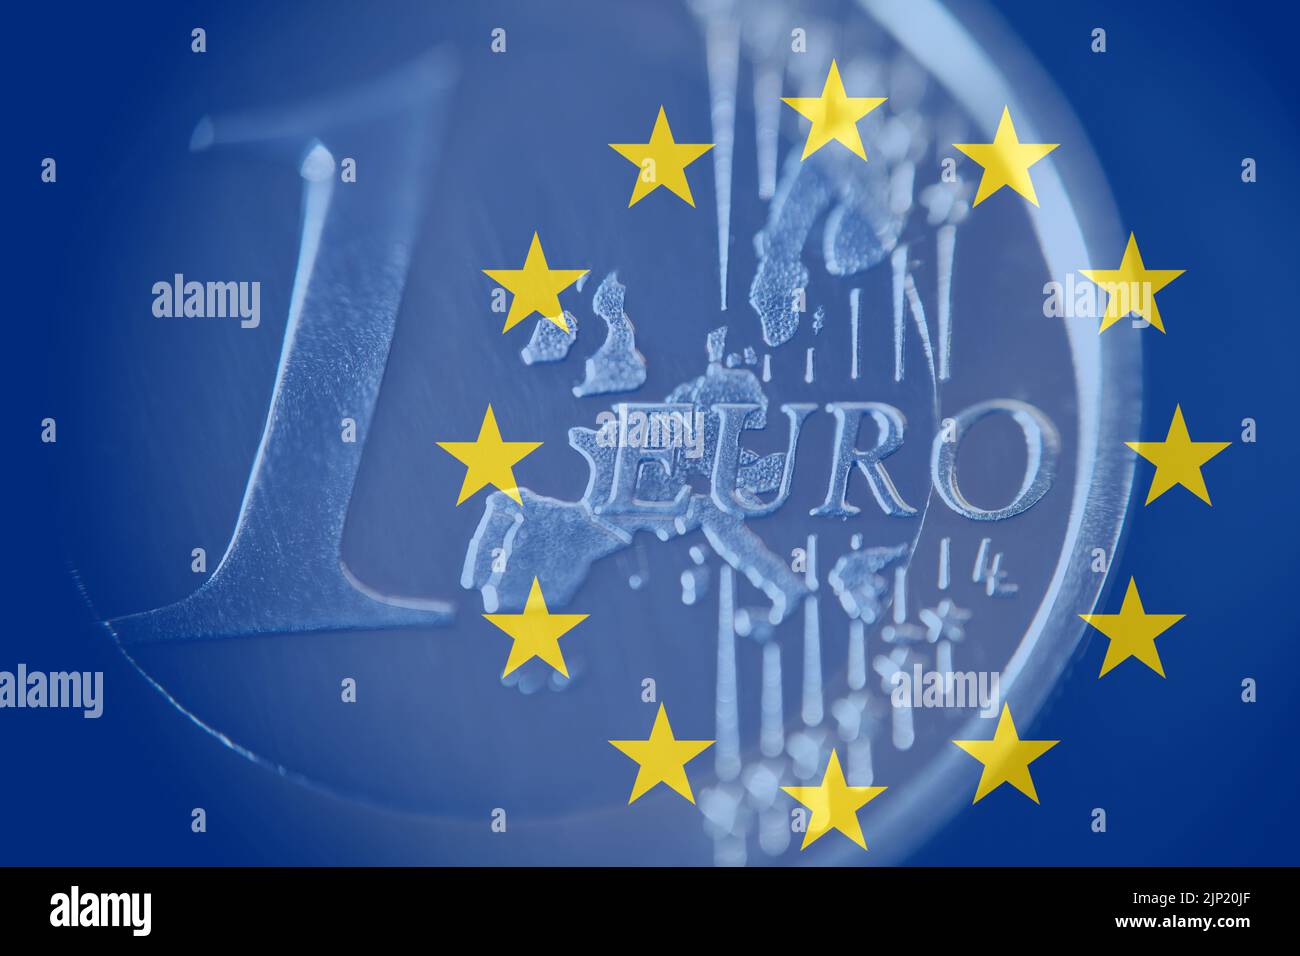 One Euro Coin tinted in blue color, with yellow european stars around 'EURO'. Stock Photo